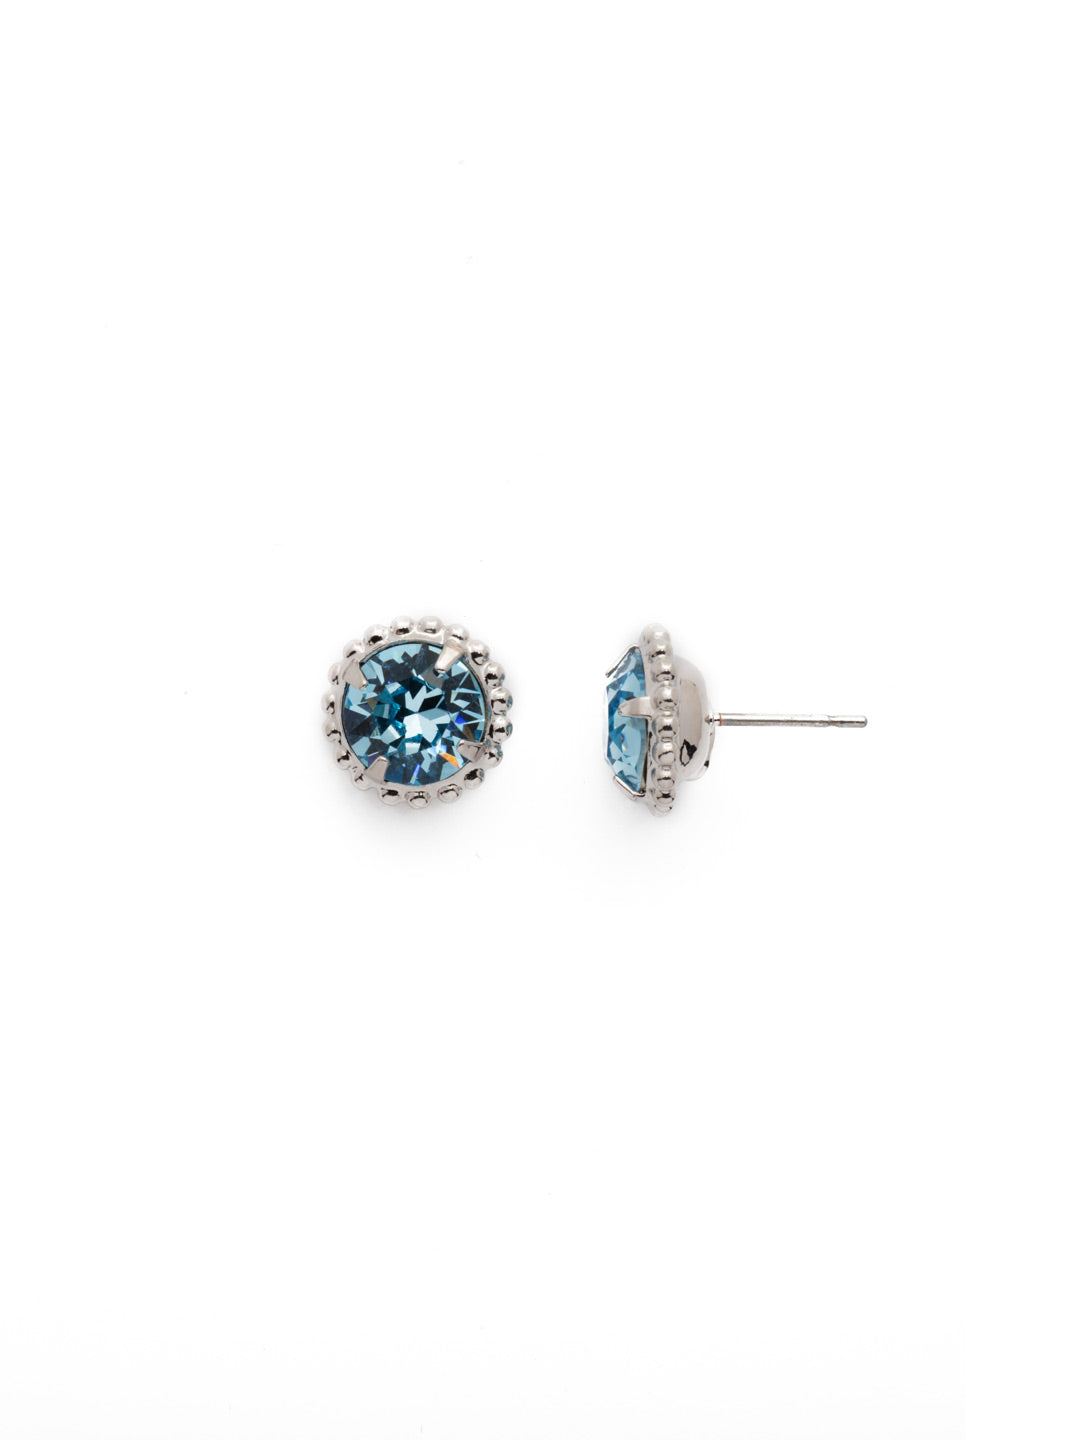 Simplicity Stud Earrings - EBY38RHAQU - <p>A timeless classic, the Simplicity Stud Earrings feature round cut crystals in a variety of colors; accented with a halo of metal beaded detail. Need help picking a stud? <a href="https://www.sorrelli.com/blogs/sisterhood/round-stud-earrings-101-a-rundown-of-sizes-styles-and-sparkle">Check out our size guide!</a> From Sorrelli's Aquamarine collection in our Palladium Silver-tone finish.</p>